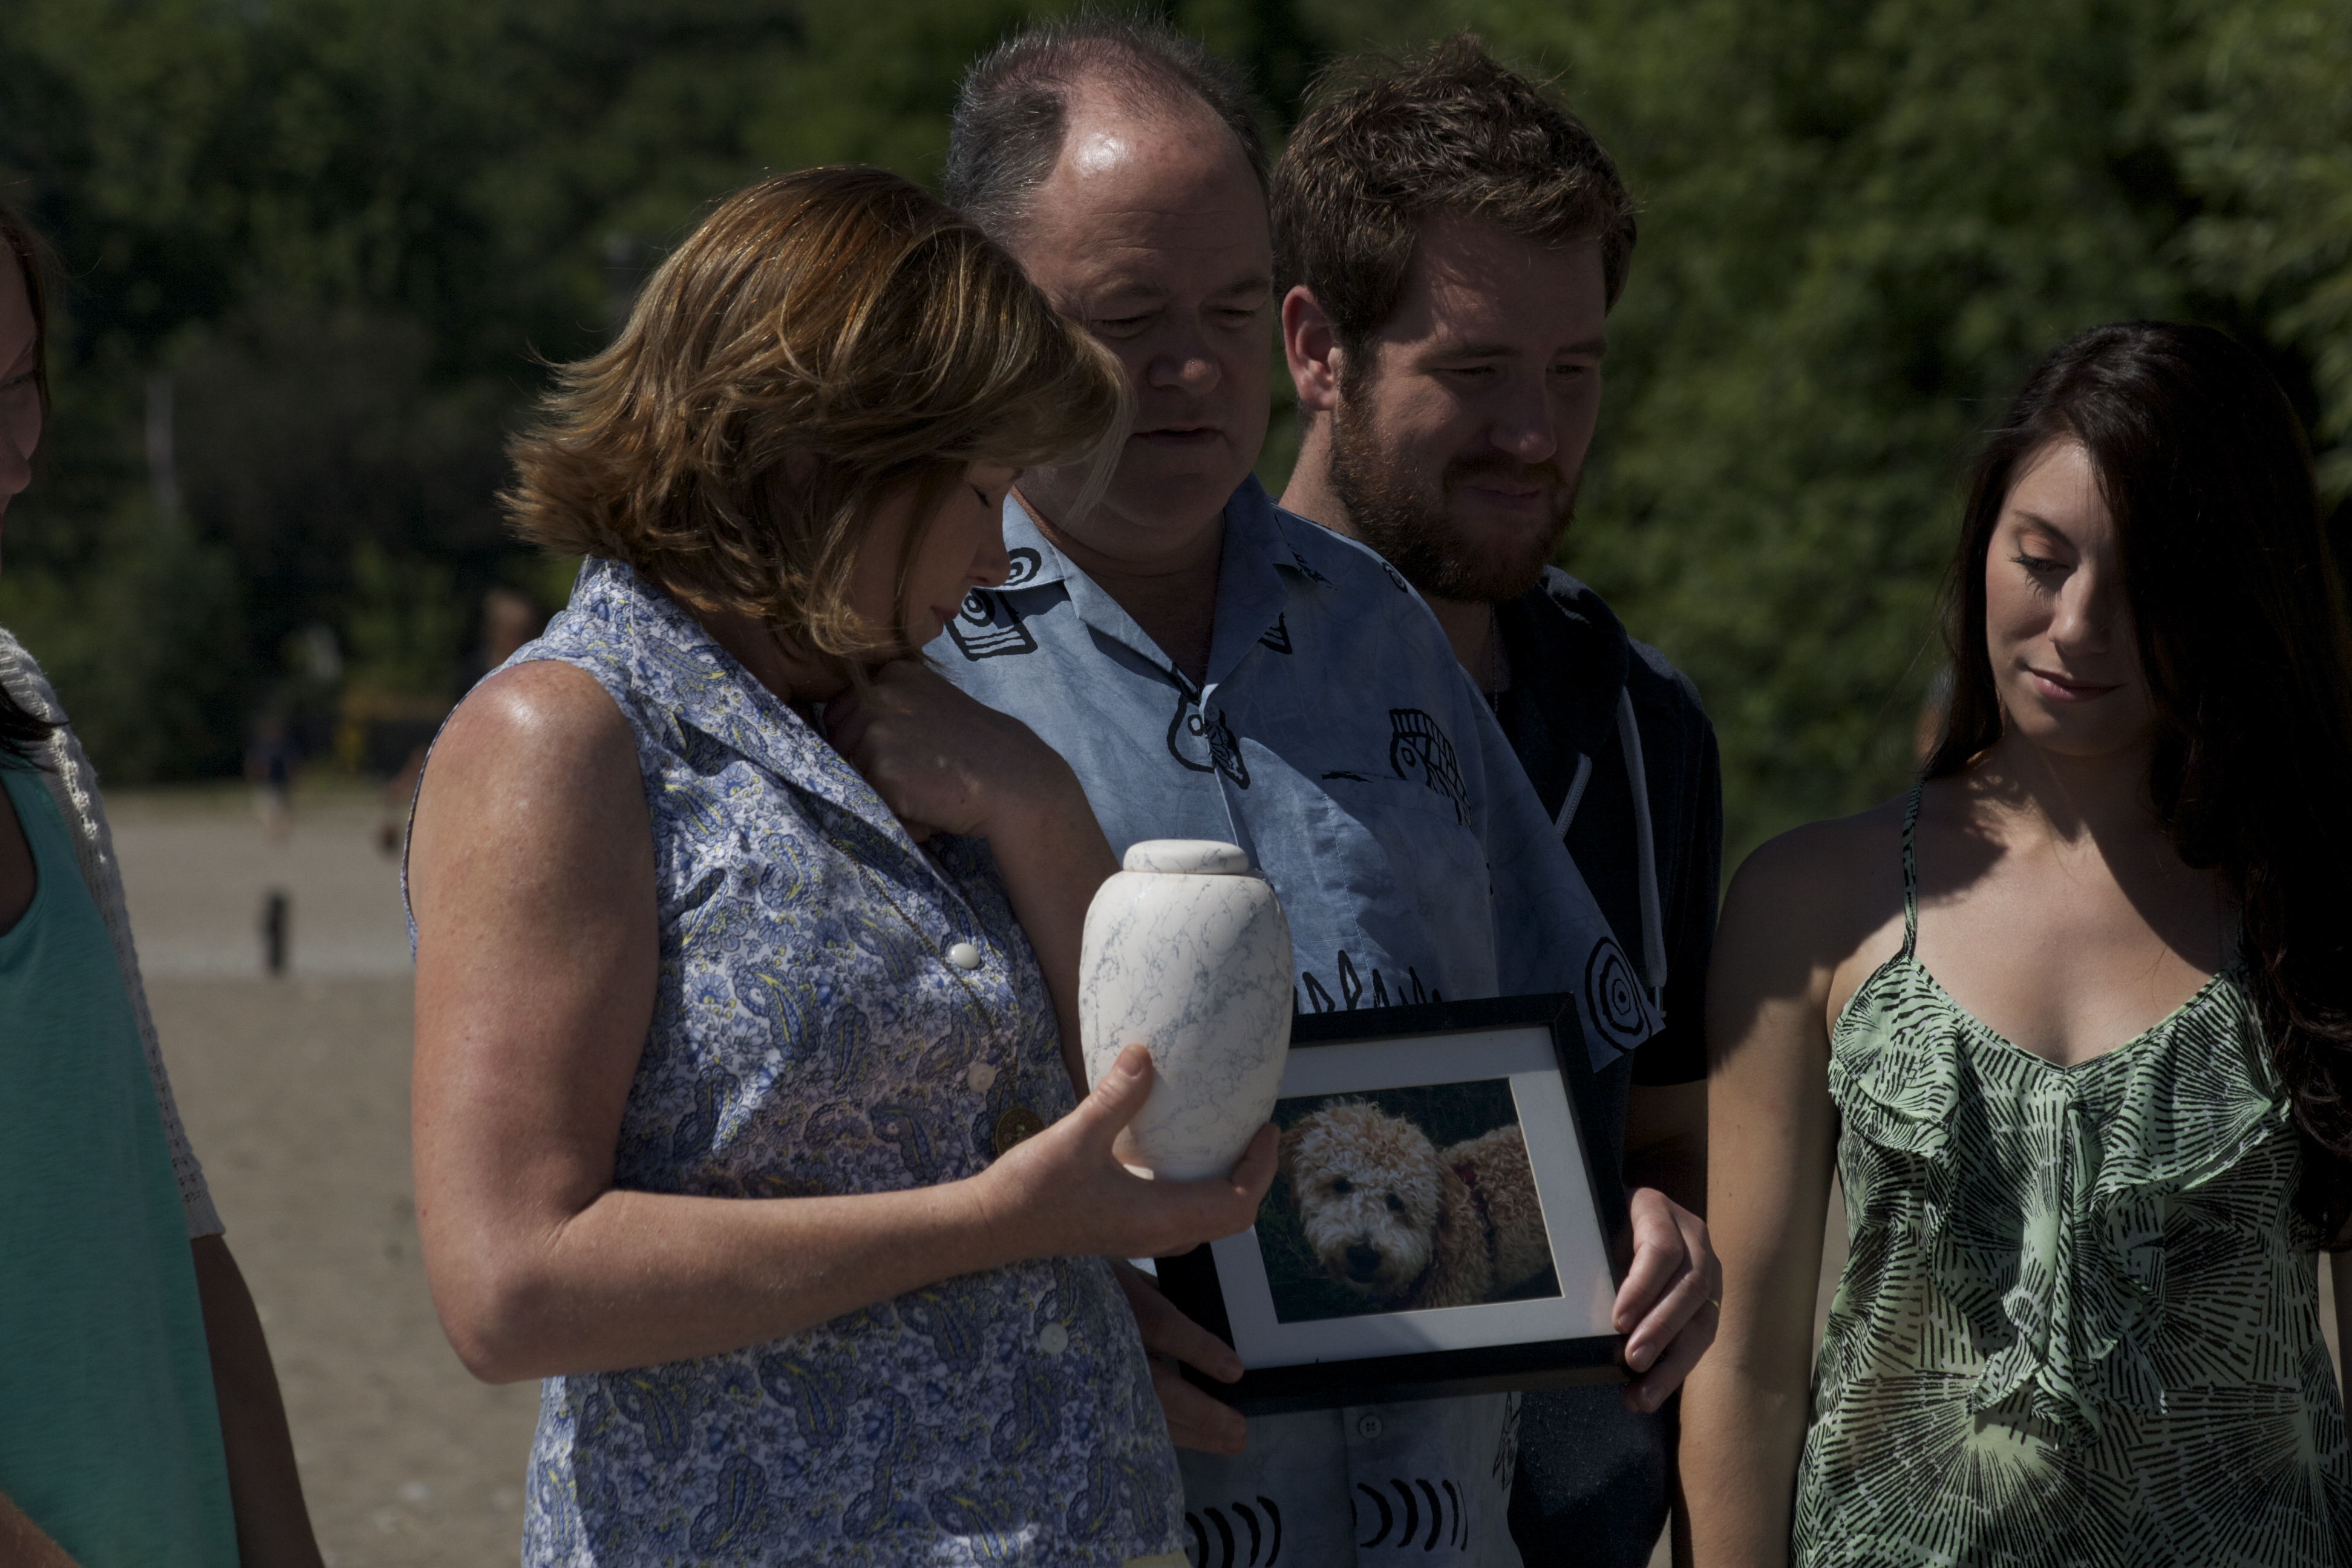 Deanna Little (right), Cuyler Foster, David Huband and Christina Collins (left) in After Lola